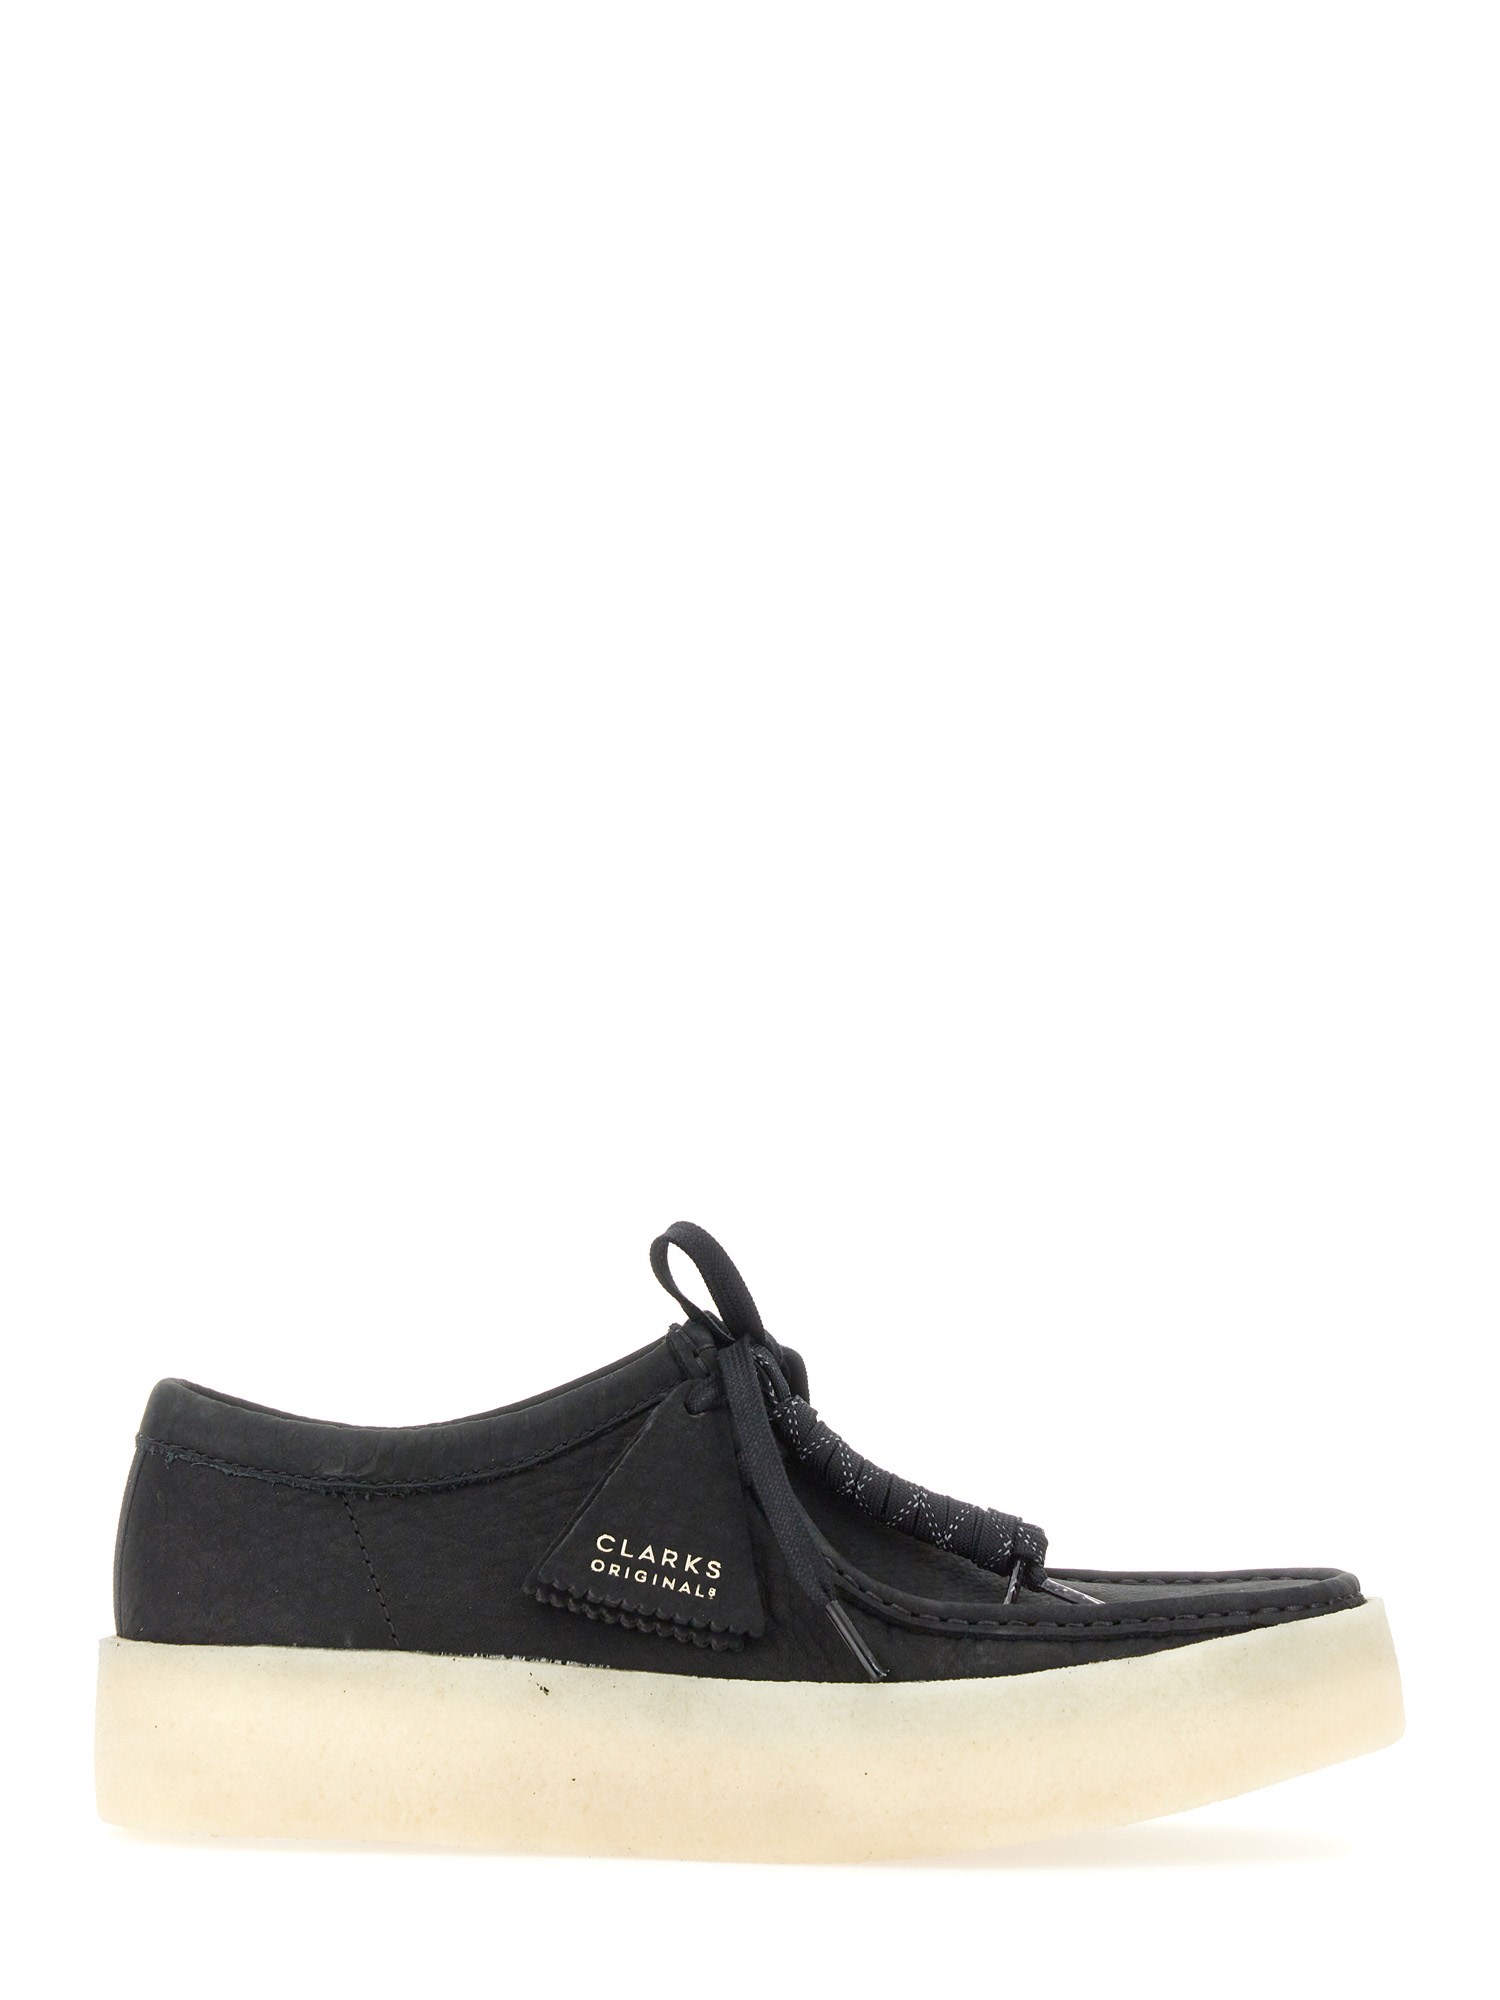 CLARKS WALLABEE LACE-UP SHOE